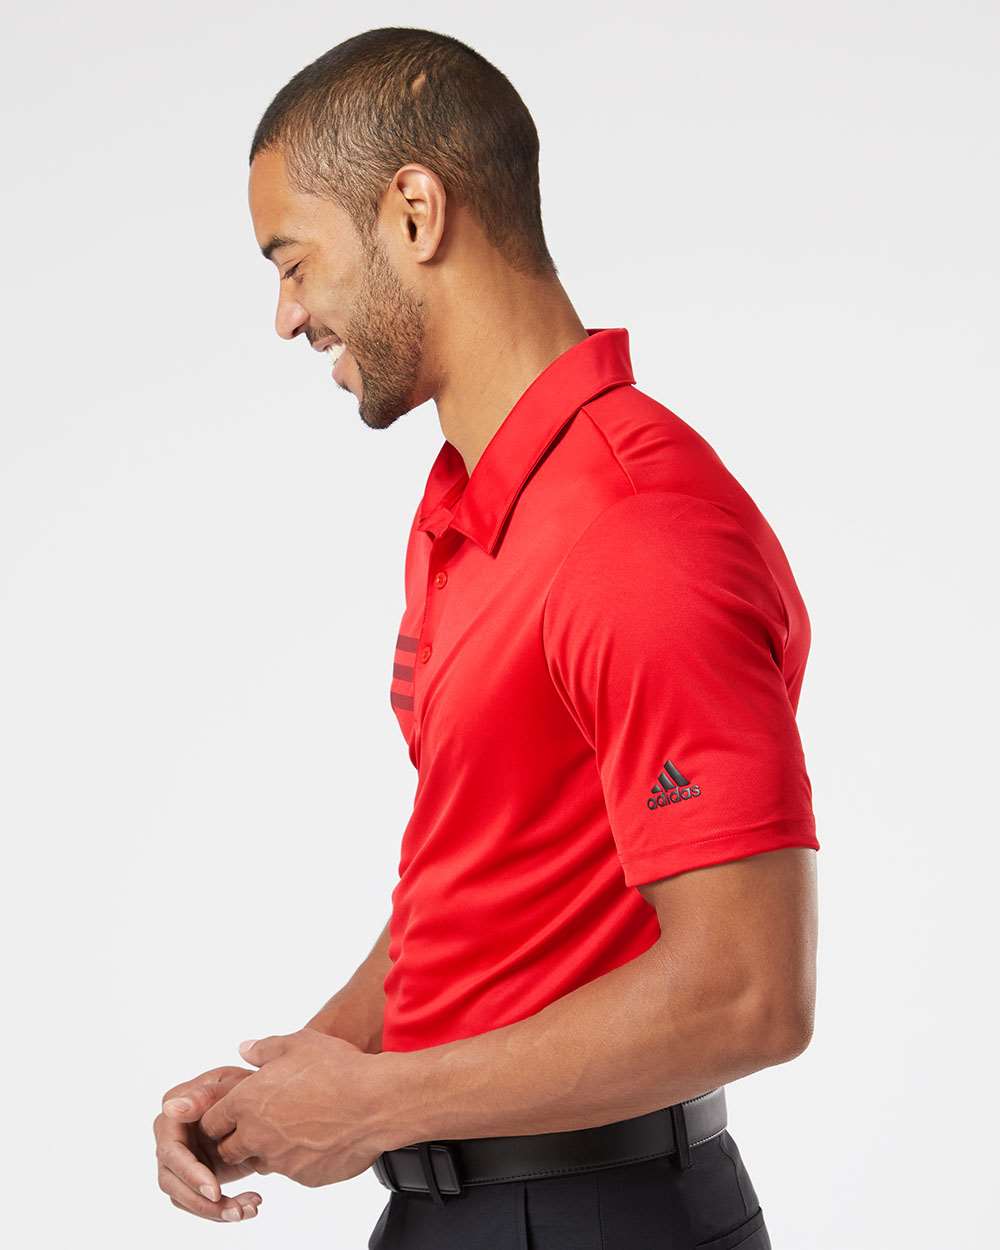 Adidas  A324 3-Stripes Chest Polo Men's T-Shirt #colormdl_Collegiate Red/ Black